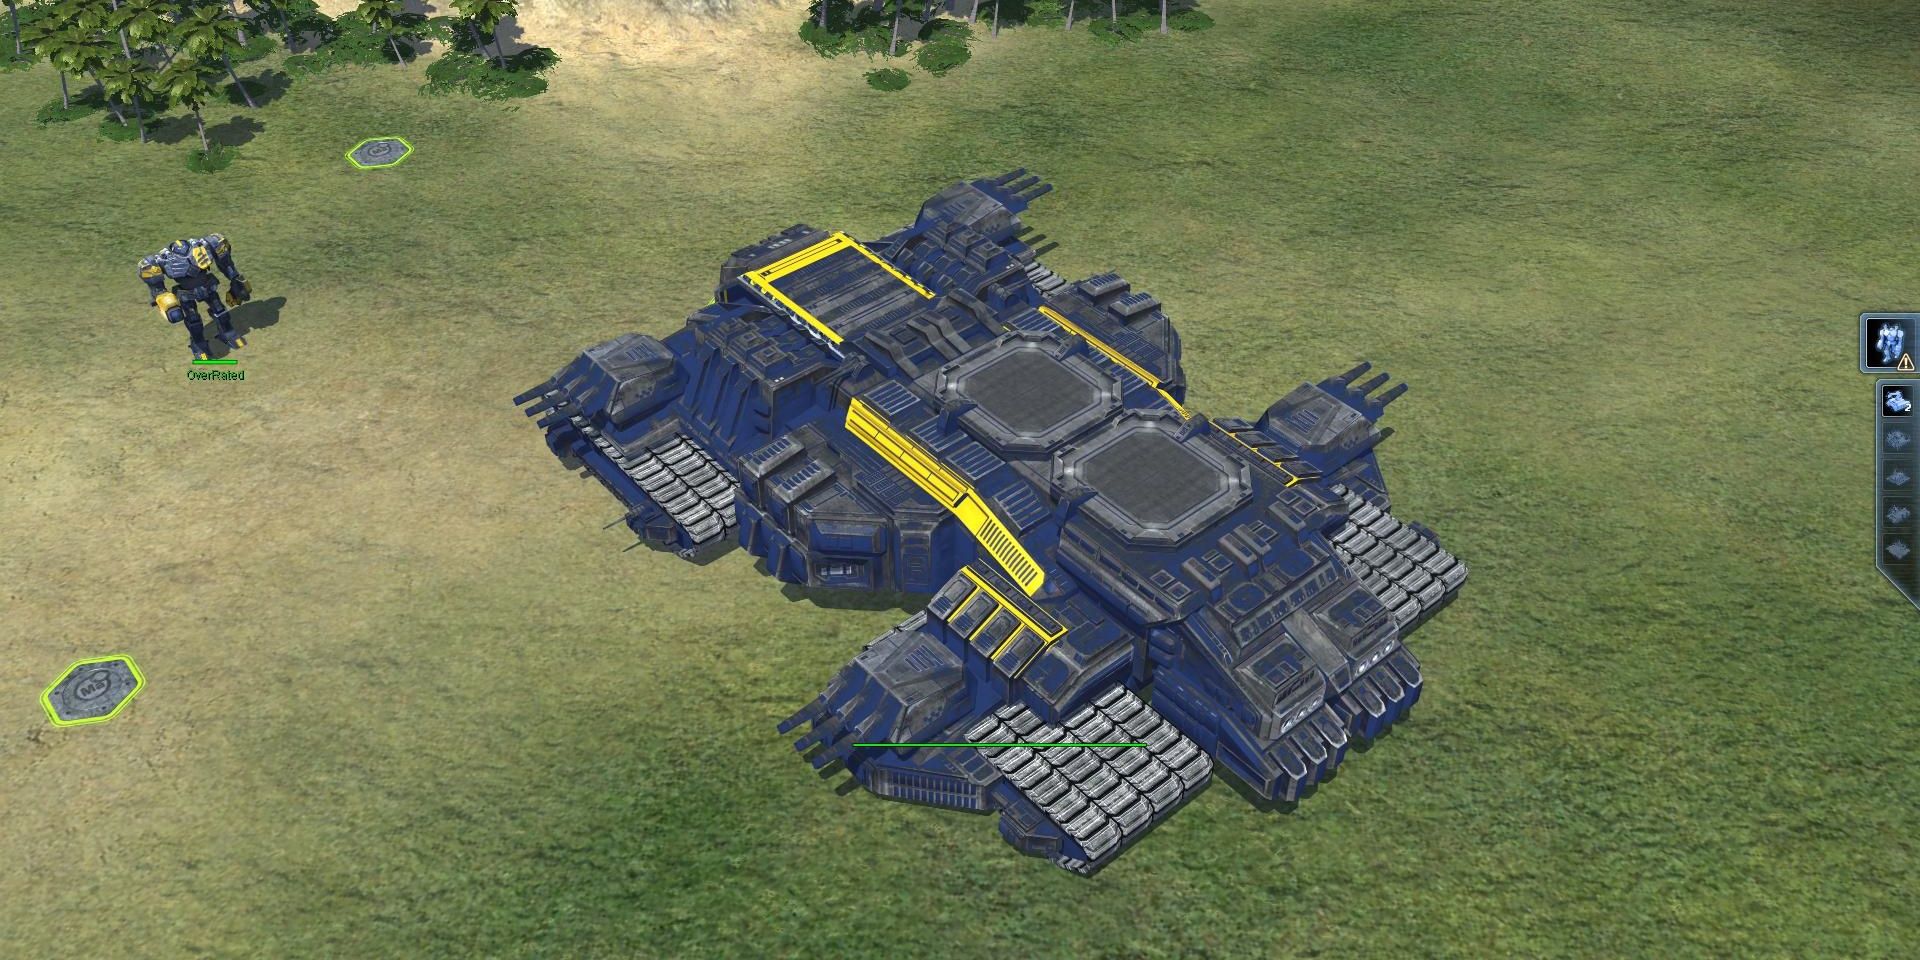 High-Resolution Terrain Texture Pack mod for Supreme Commander 2